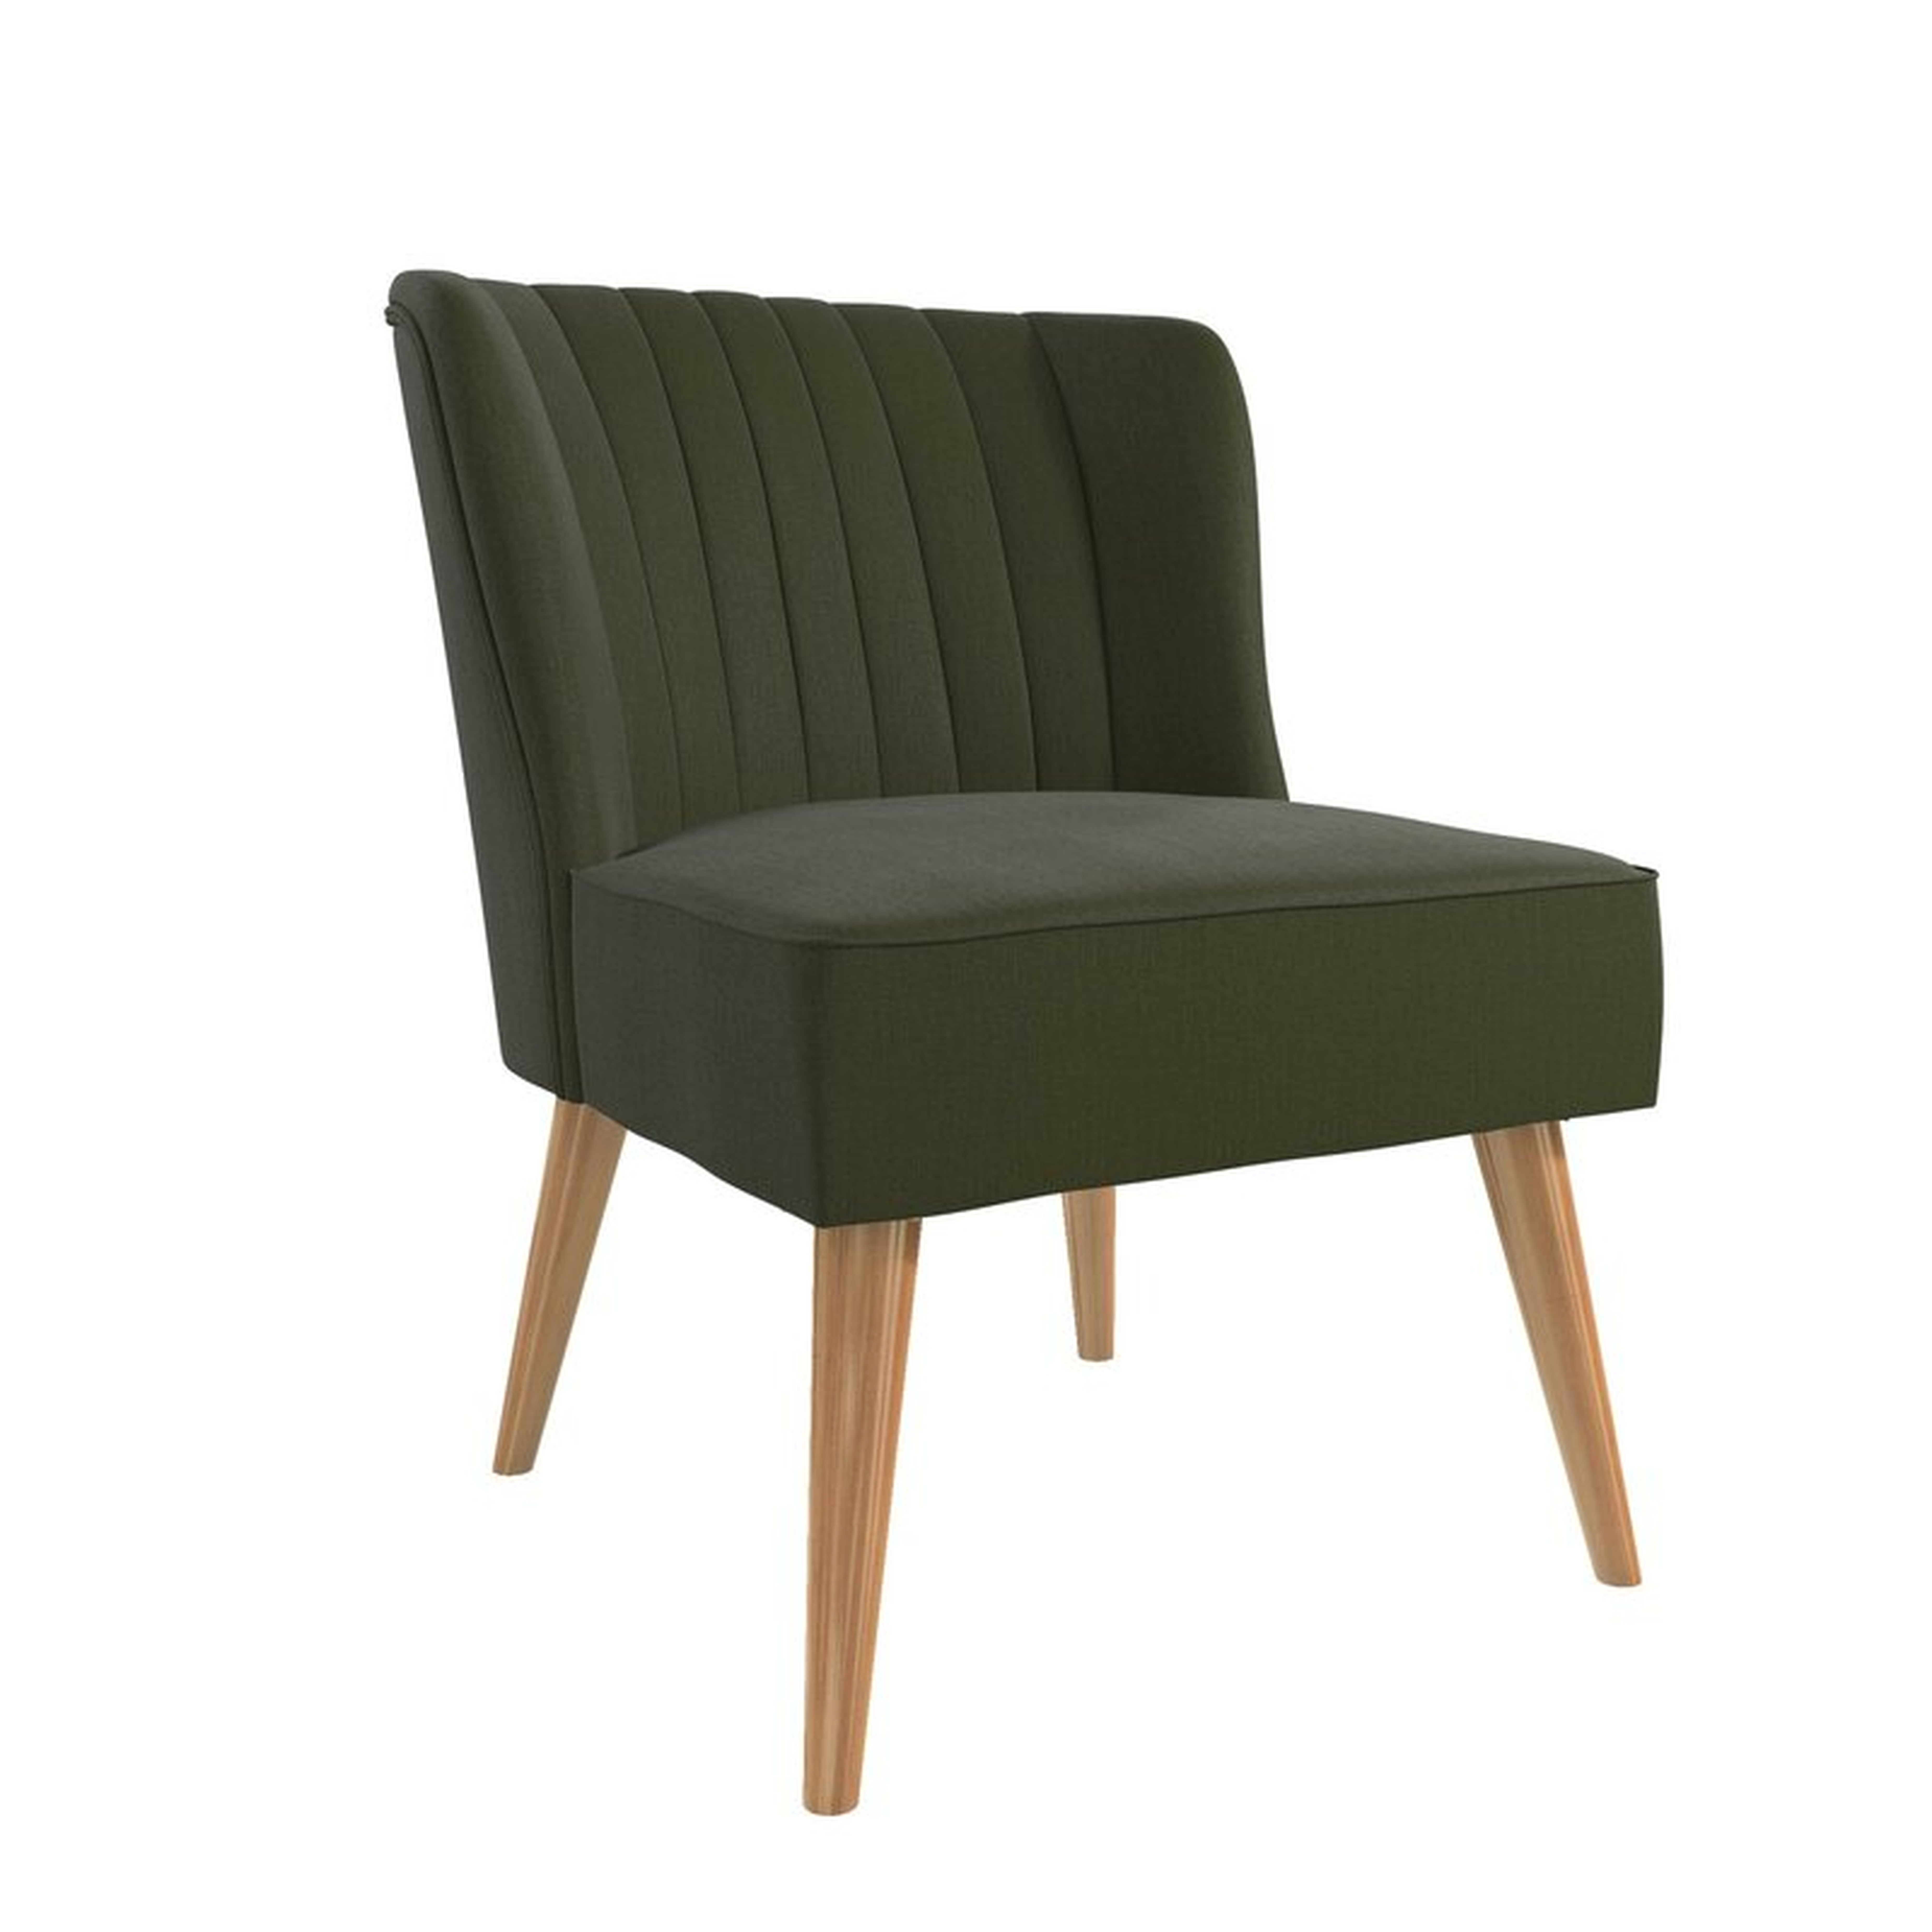 Brittany Upholstered Side Chair - Wayfair